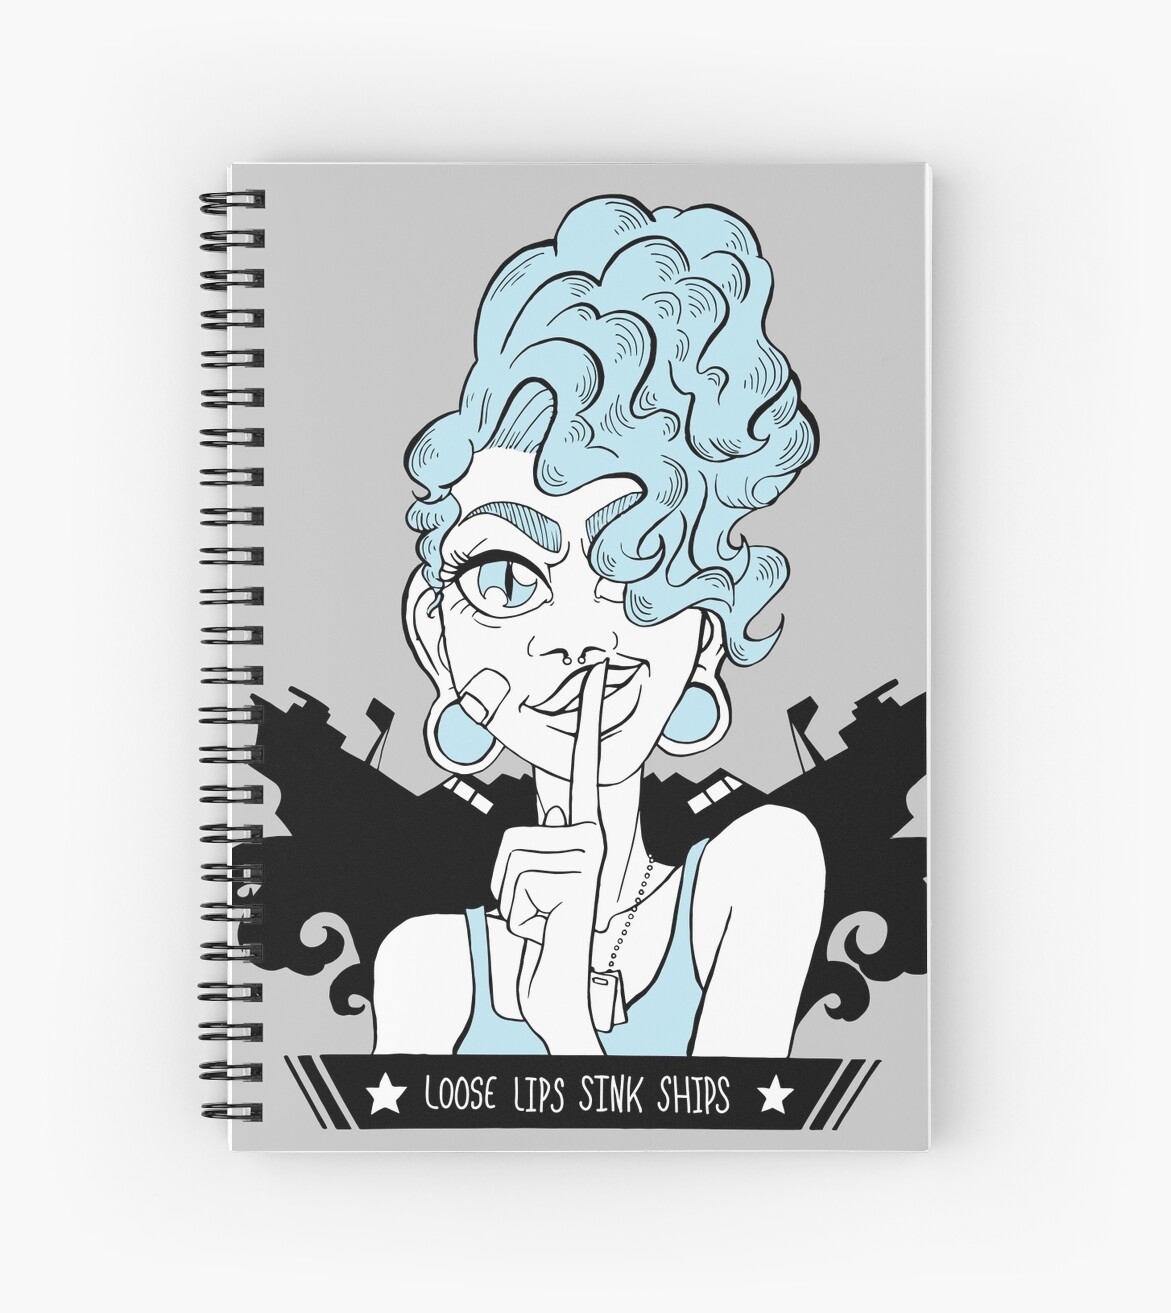 Loose Lips Sink Ships Spiral Notebook By Stephanie Gauthier